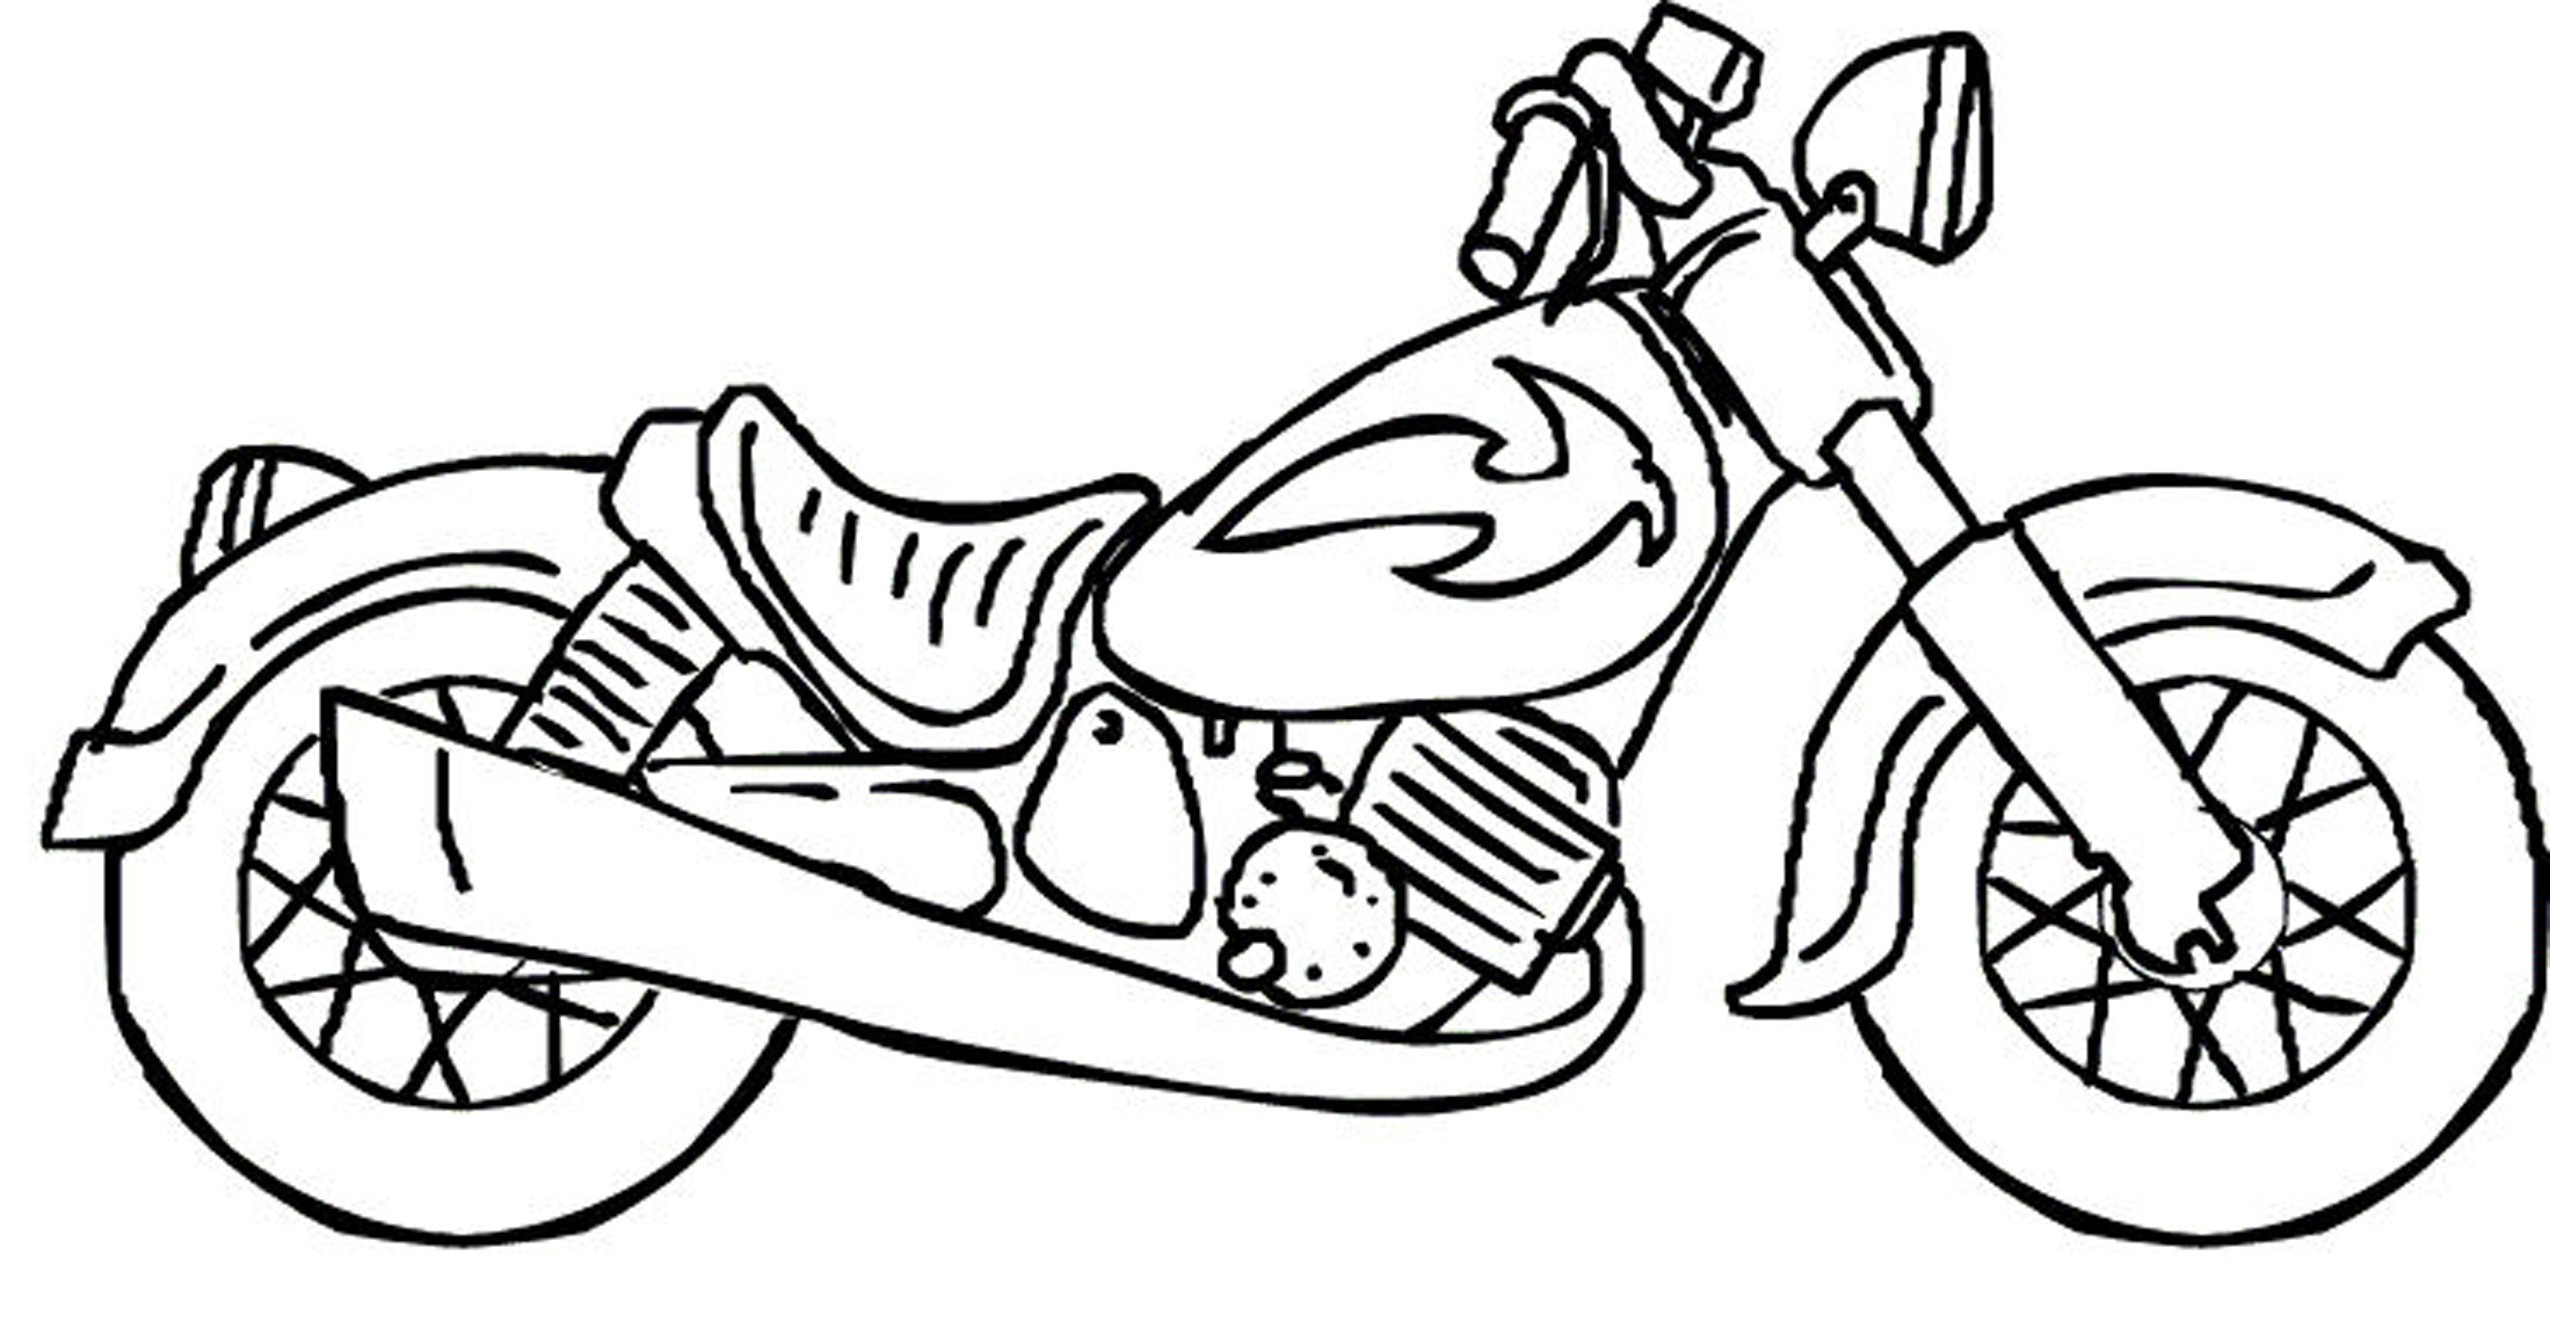 Motor Bike Coloring Pages - Coloring Home